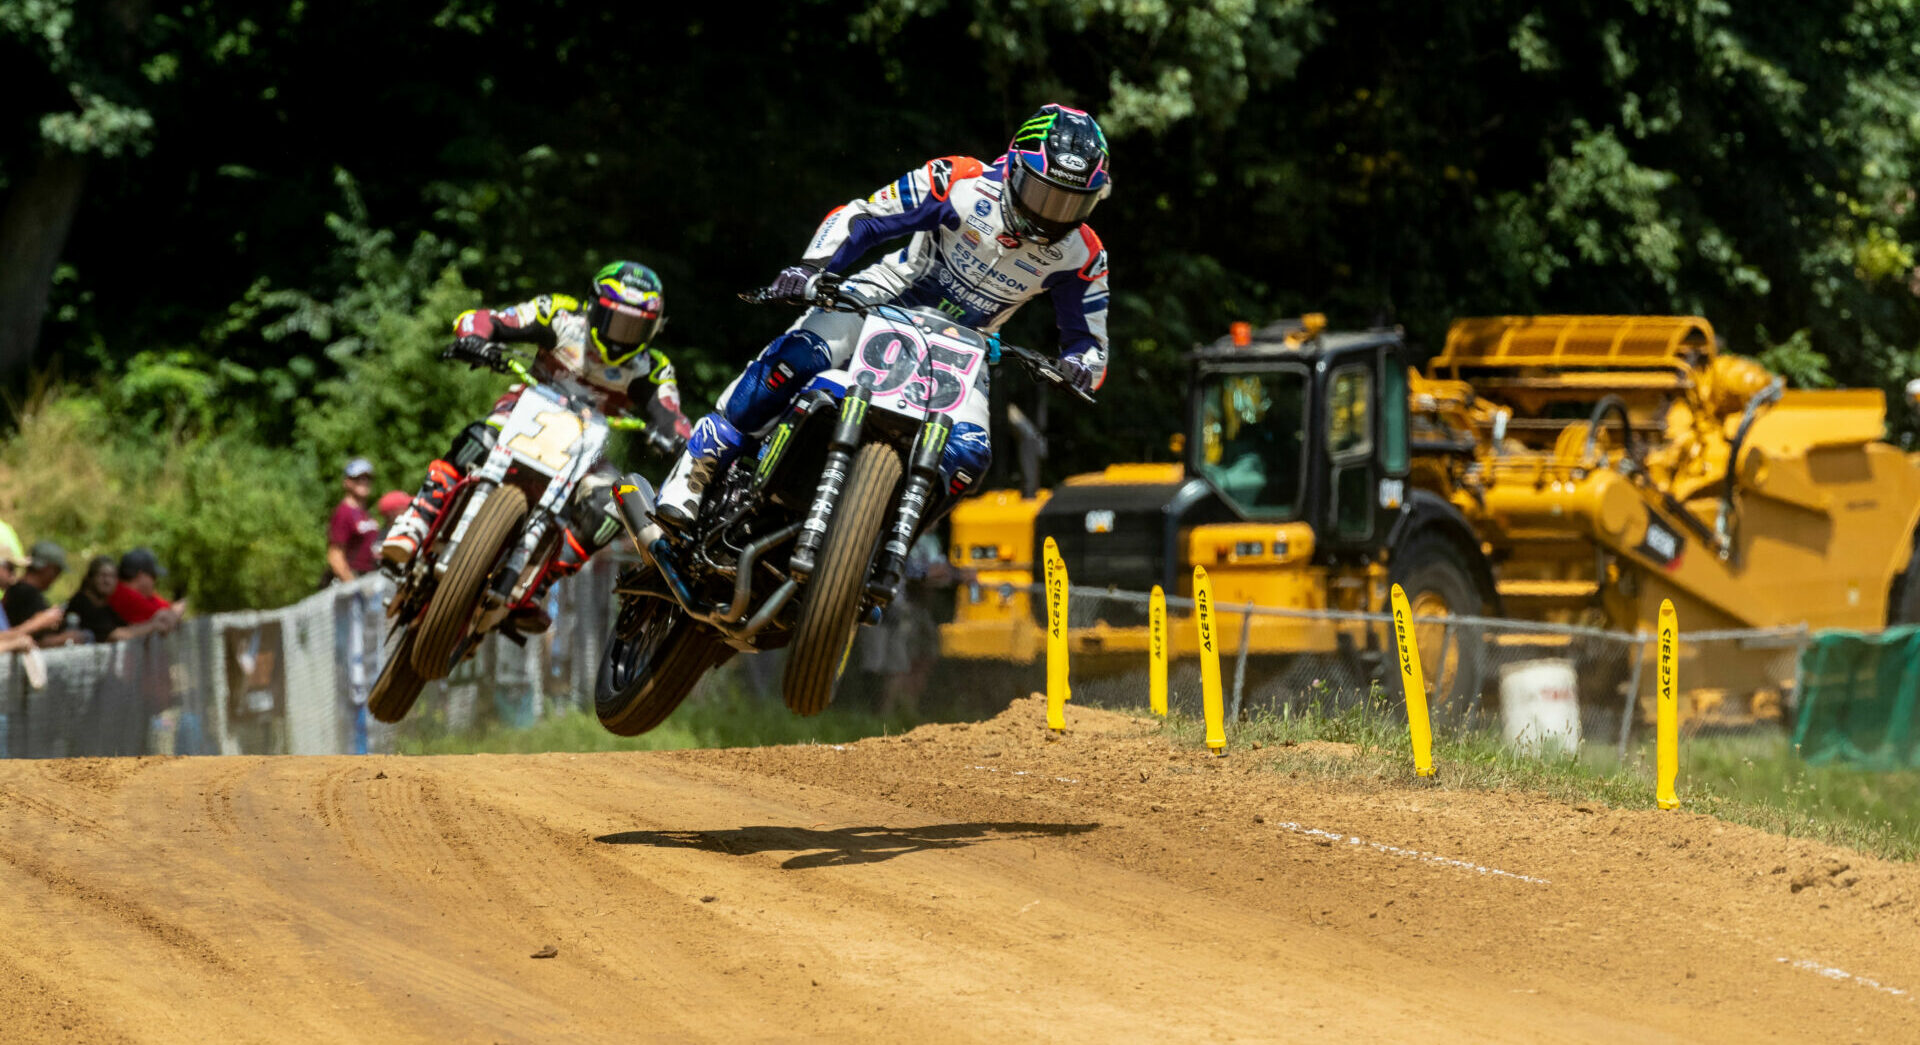 JD Beach (95) and Jared Mees (1) as seen during the Peoria TT. Photo by Tim Lester, courtesy AFT.